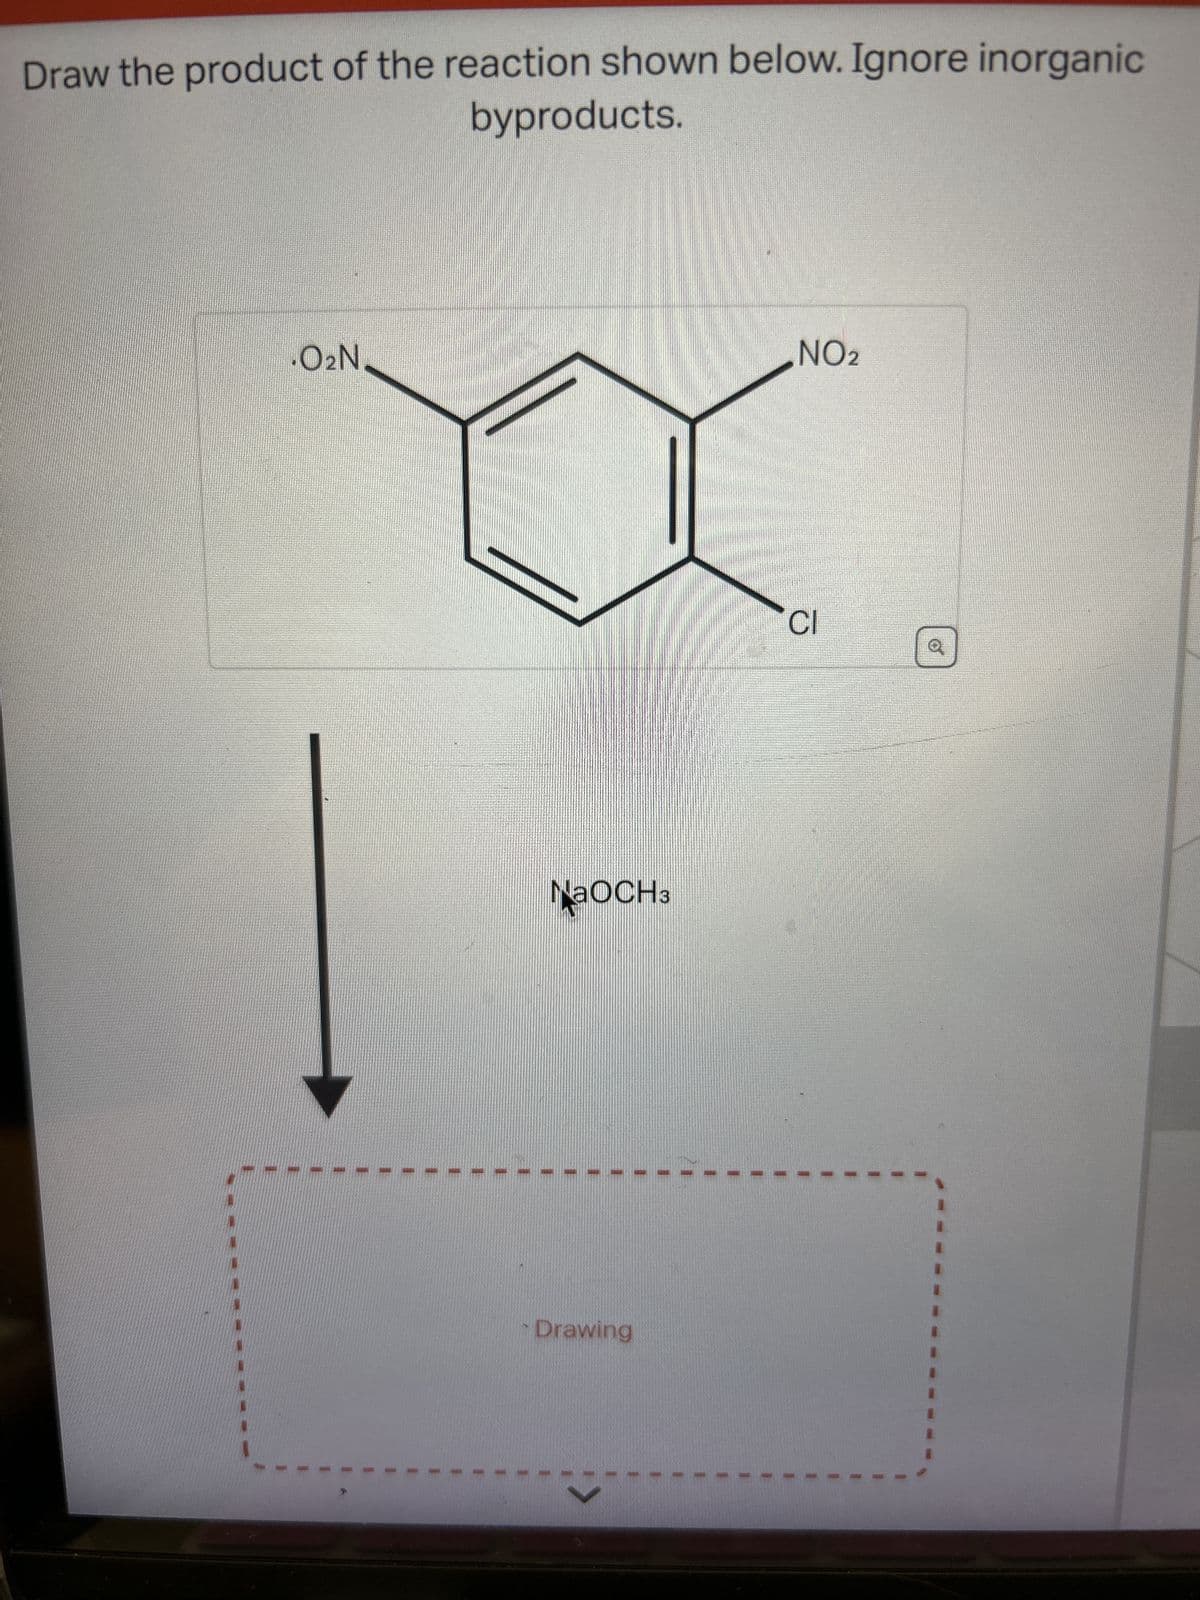 Draw the product of the reaction shown below. Ignore inorganic
byproducts.
O₂N
1
1
1
1
NaOCH3
Drawing
TV
1
www
1
1
NO2
CI
1
I
1
I